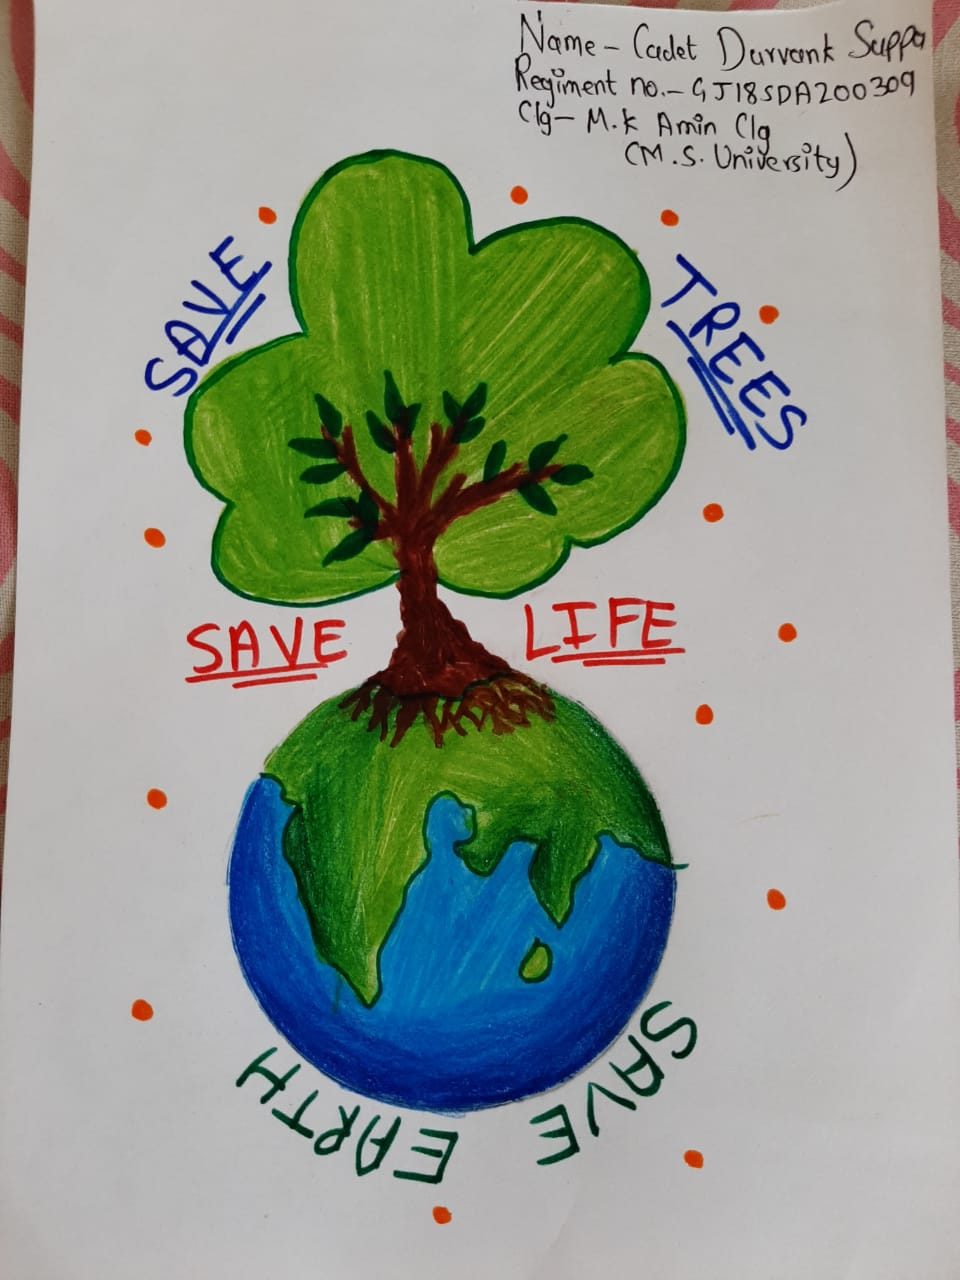 Save environment save nature poster chart drawing || project making for  competition - step by step - YouTube